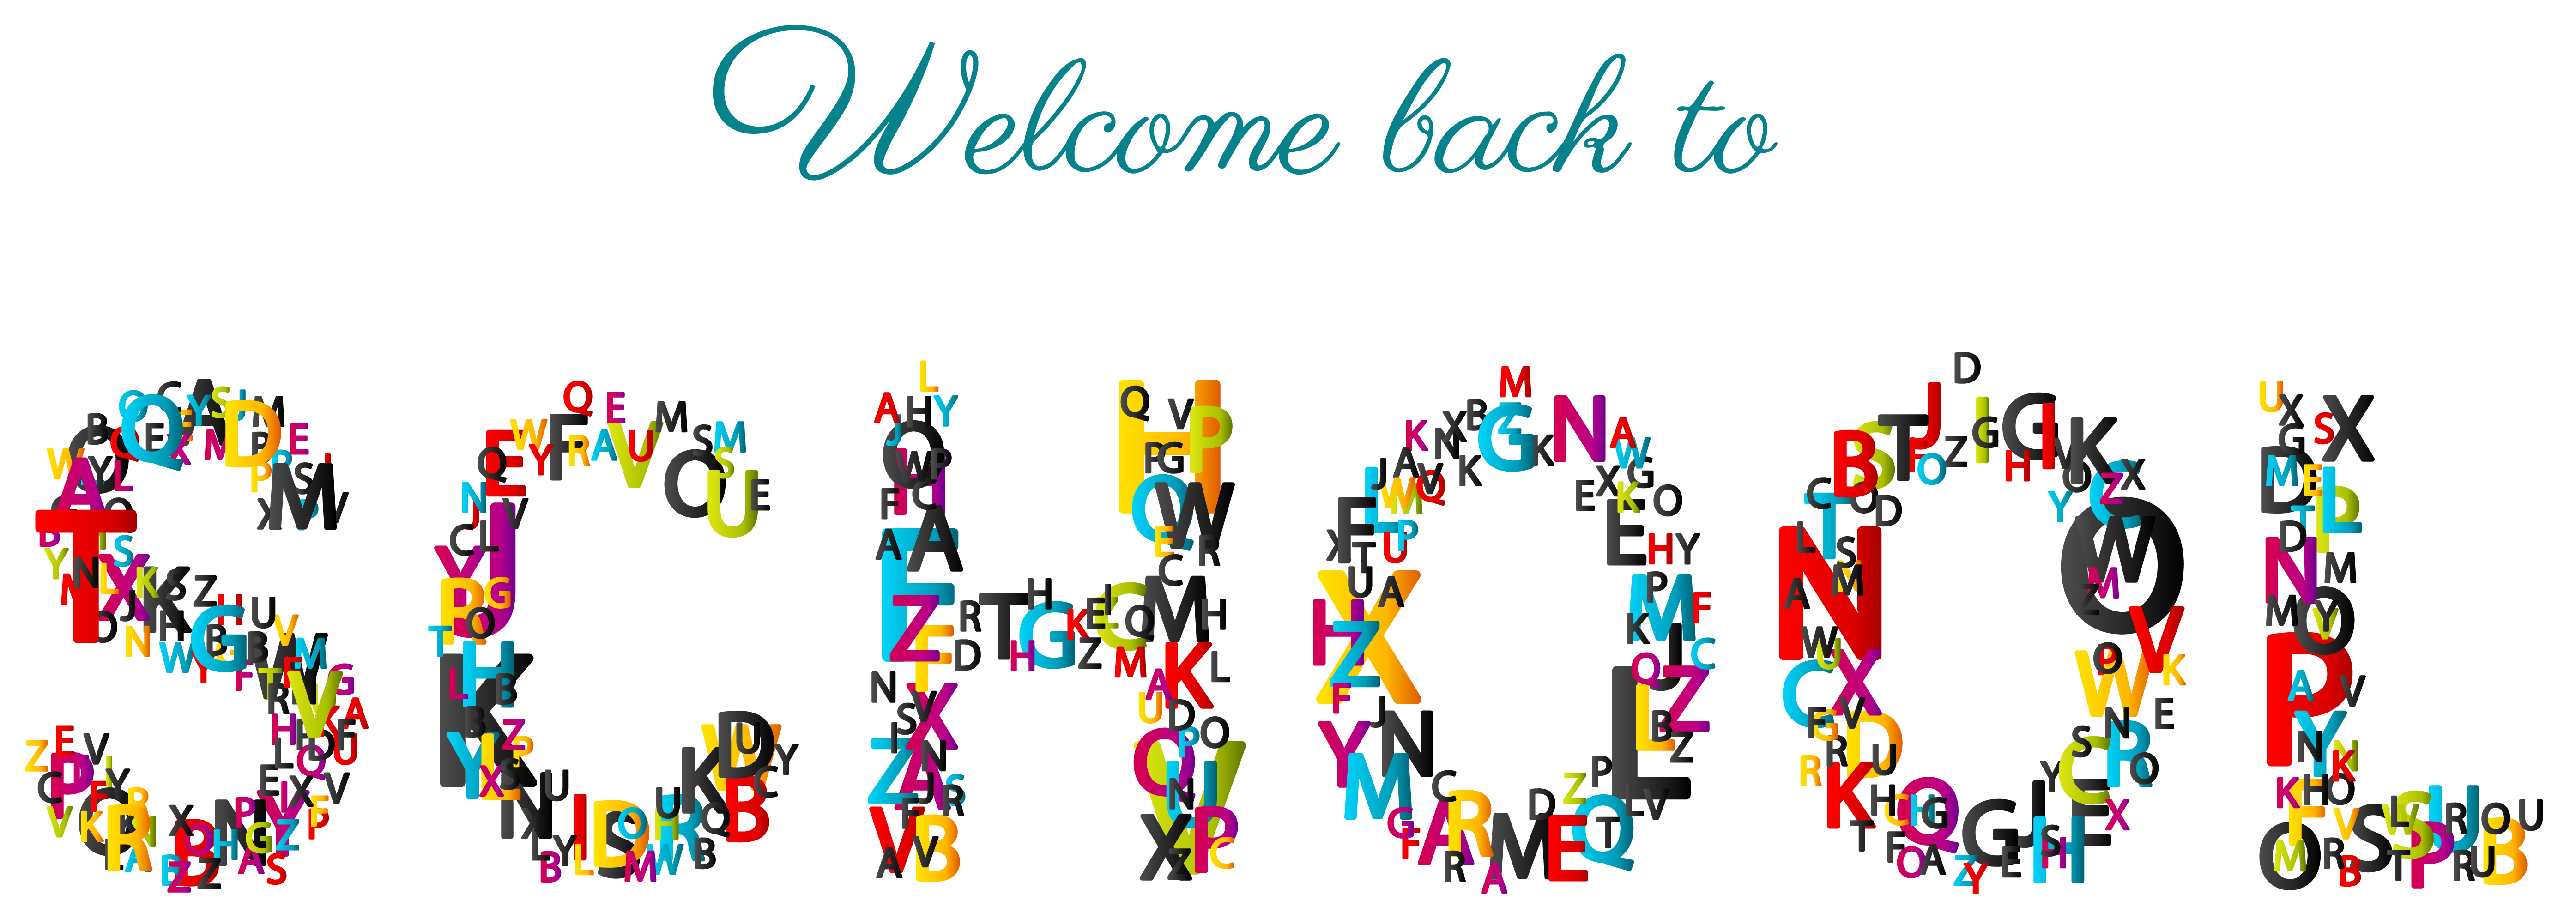 Welcome back to school clipar - Back To School Clipart Images